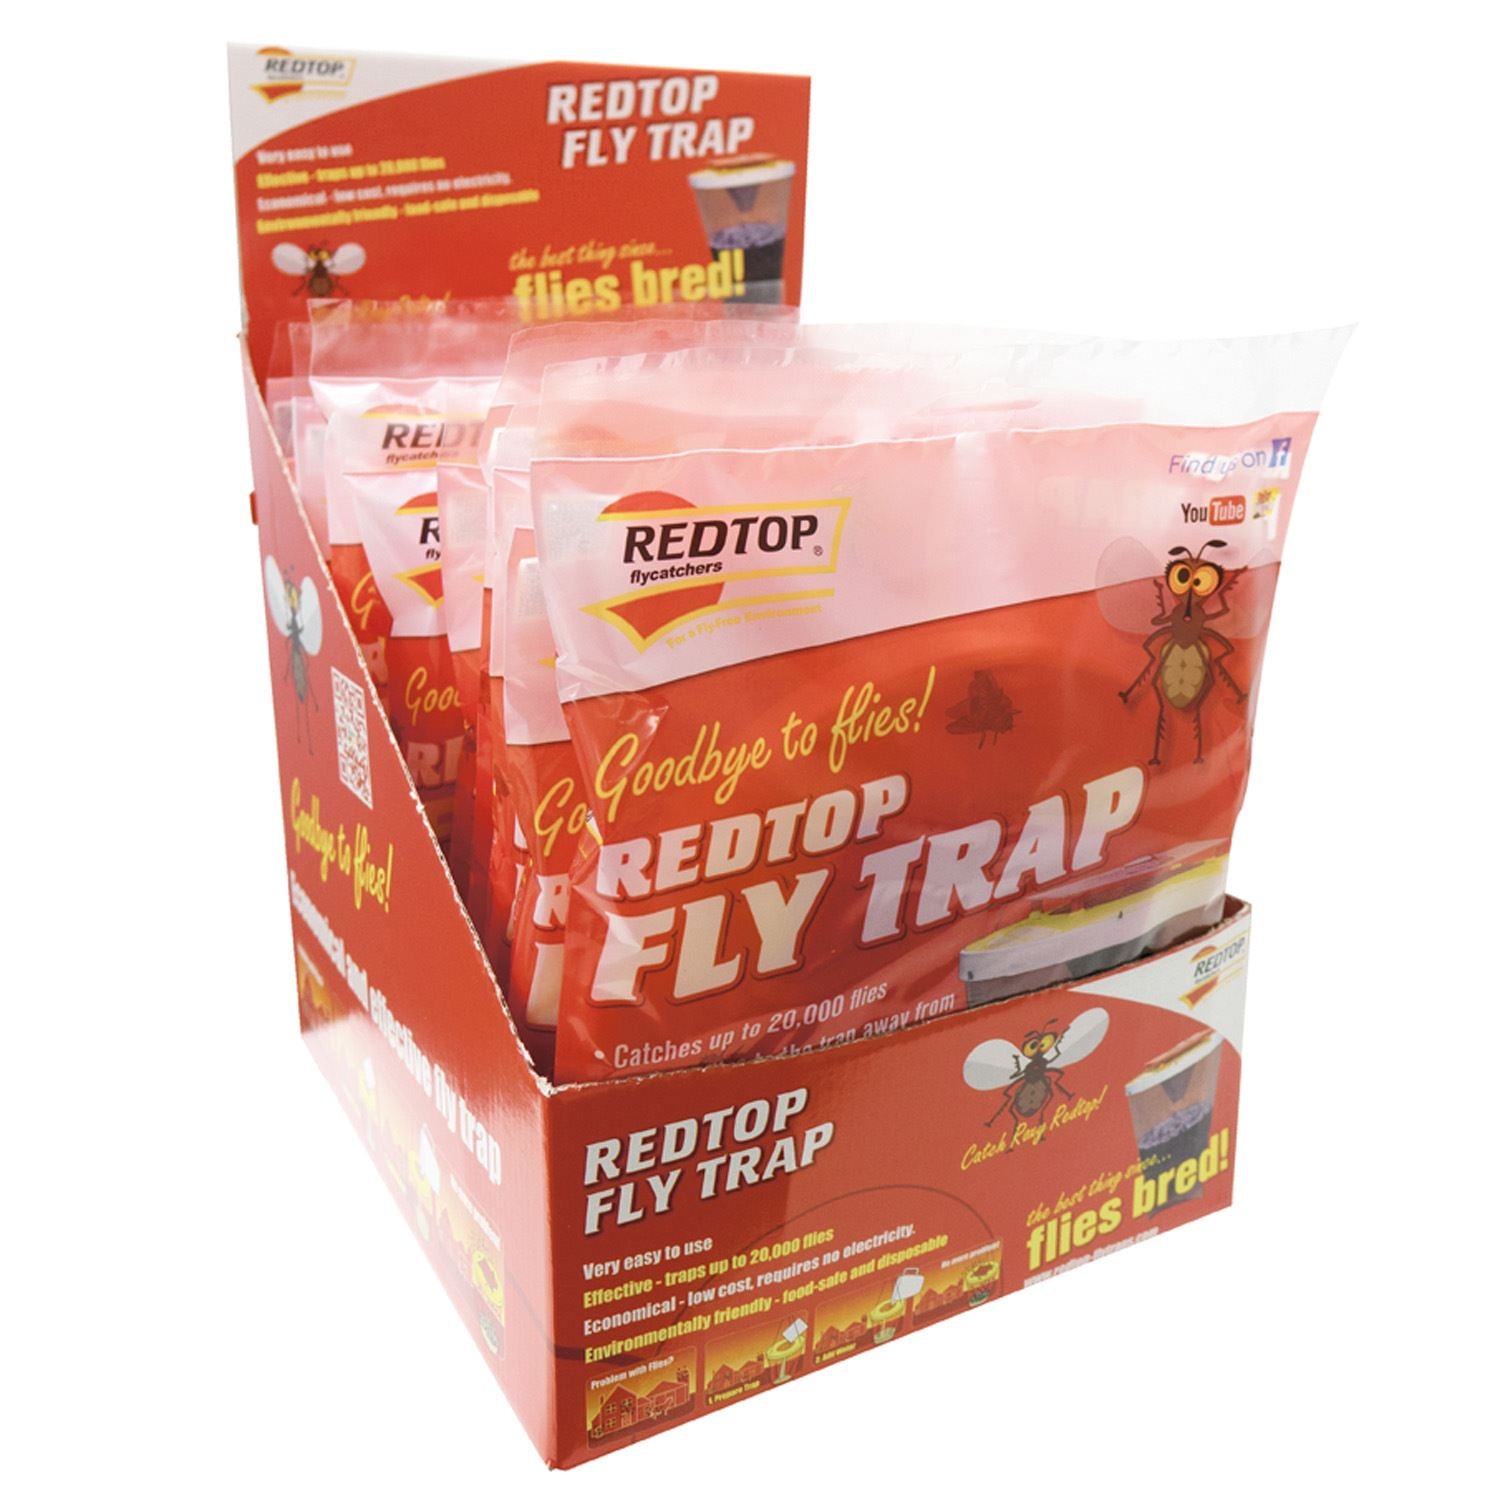 Redtop Fly Trap Pos Counter Display Box - Just Horse Riders